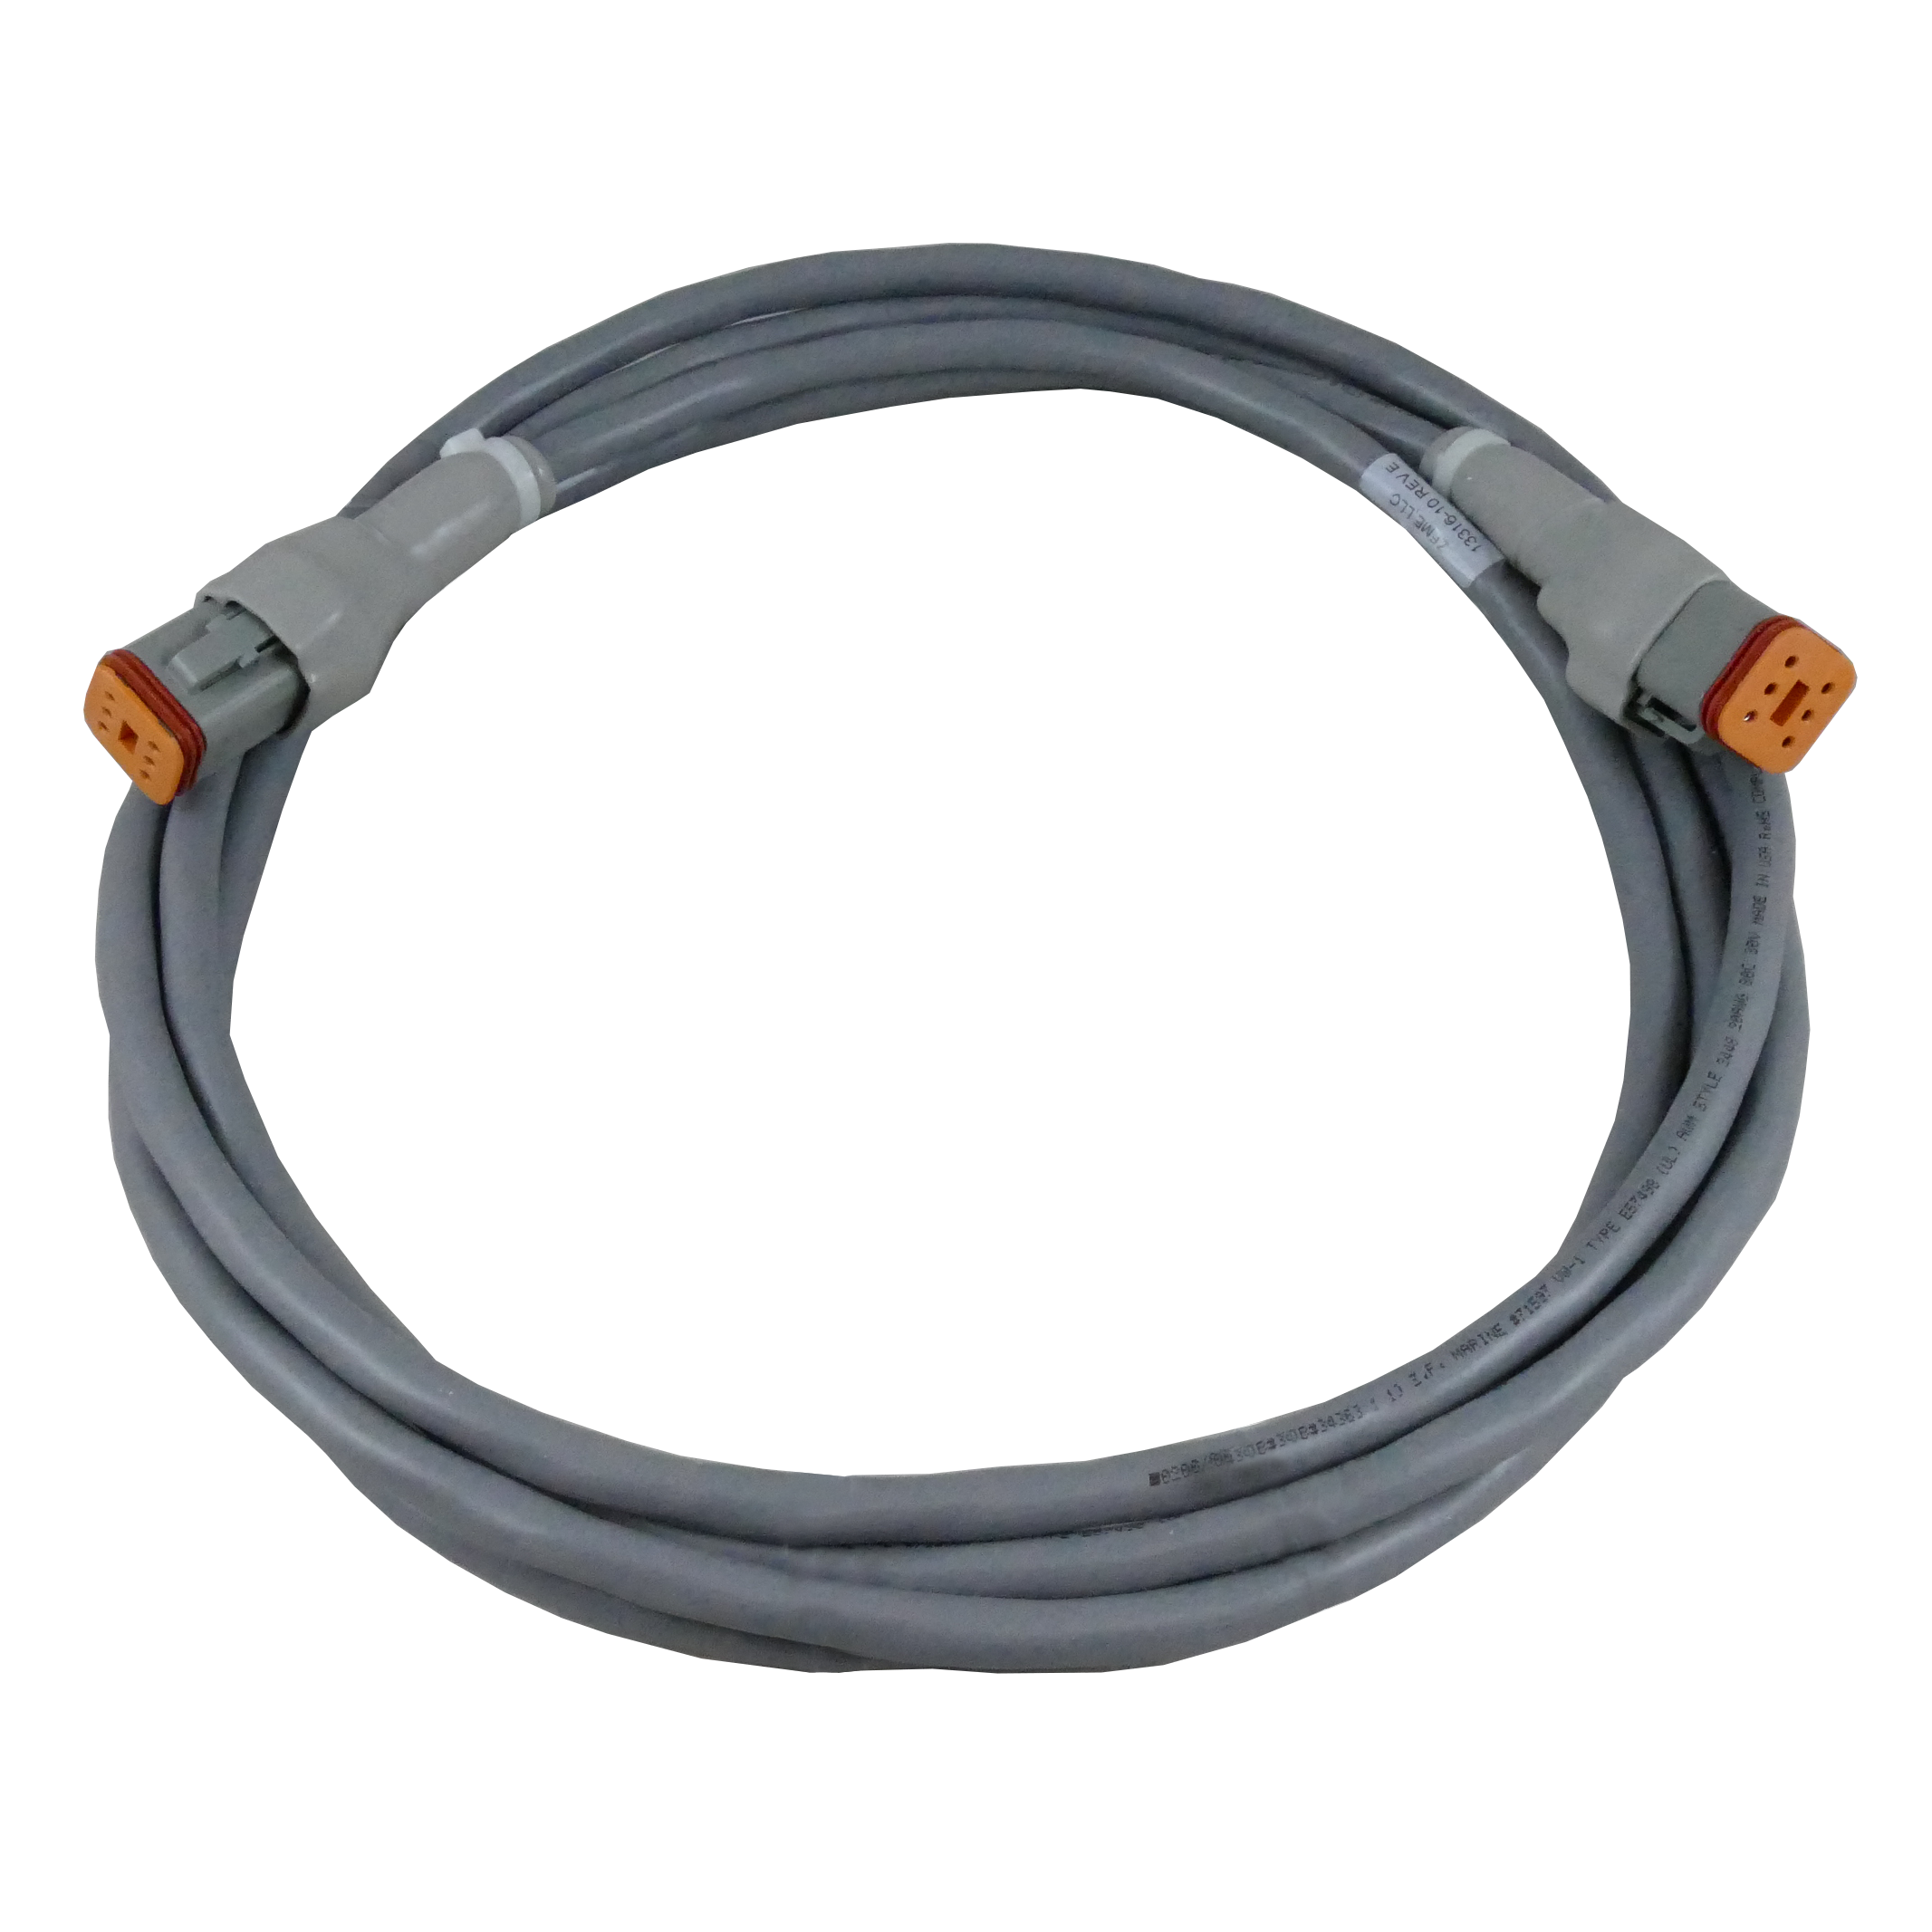 10FT CRUISE COM SERIAL COMMUN CABLE